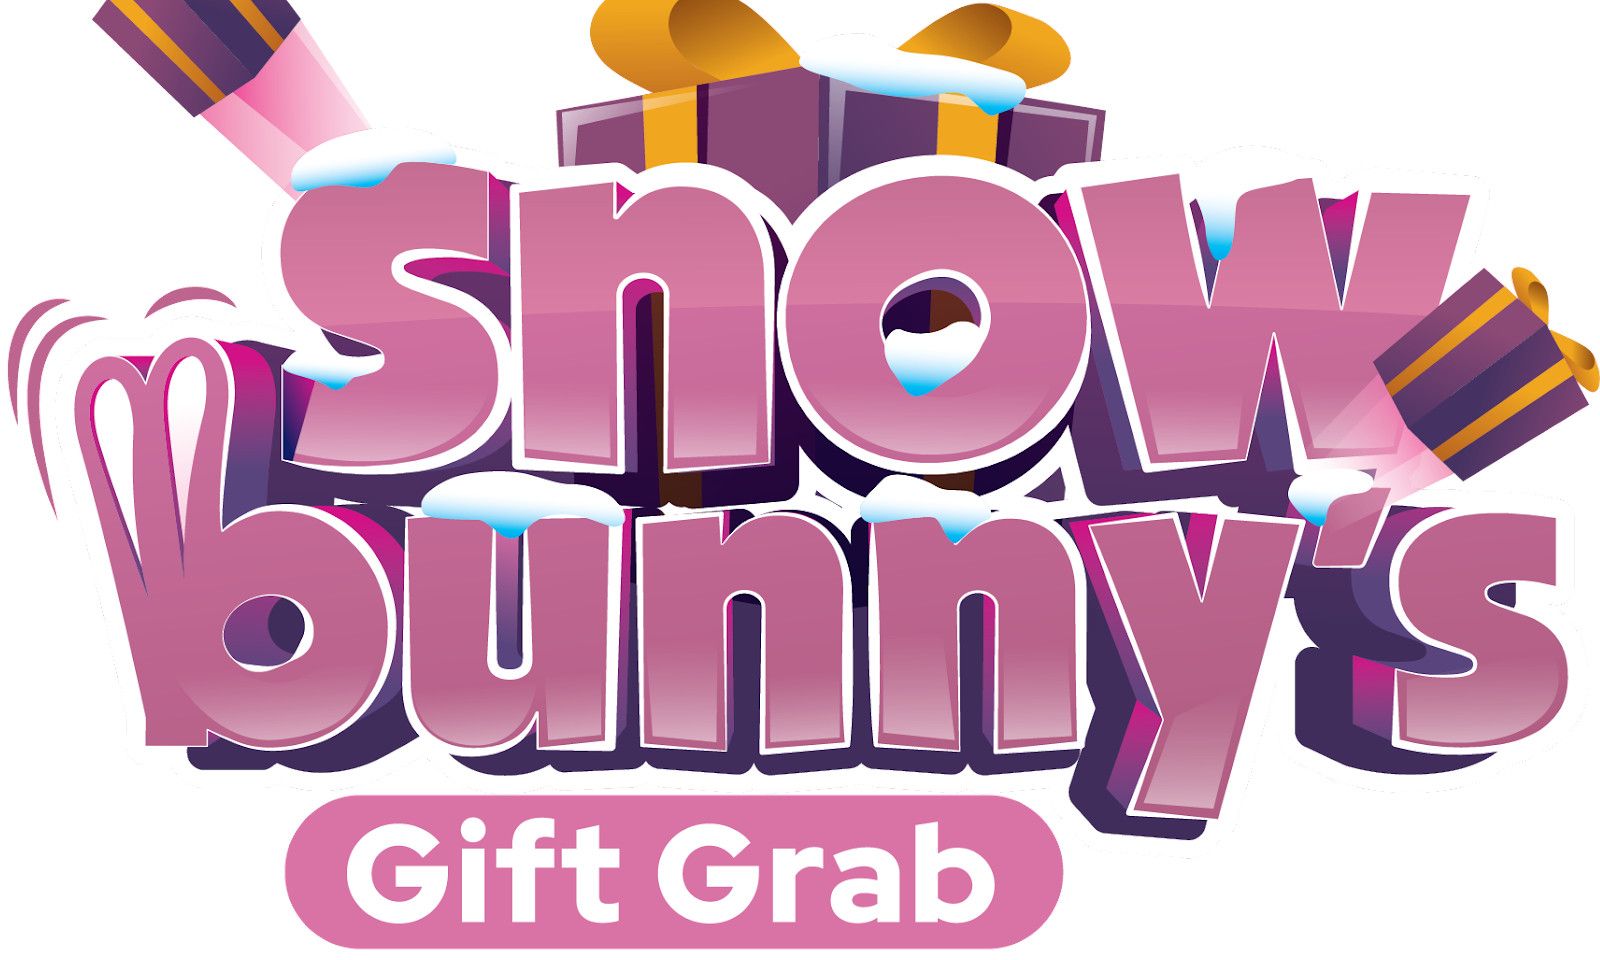 Motorbunny Launches New Mobile Video Game